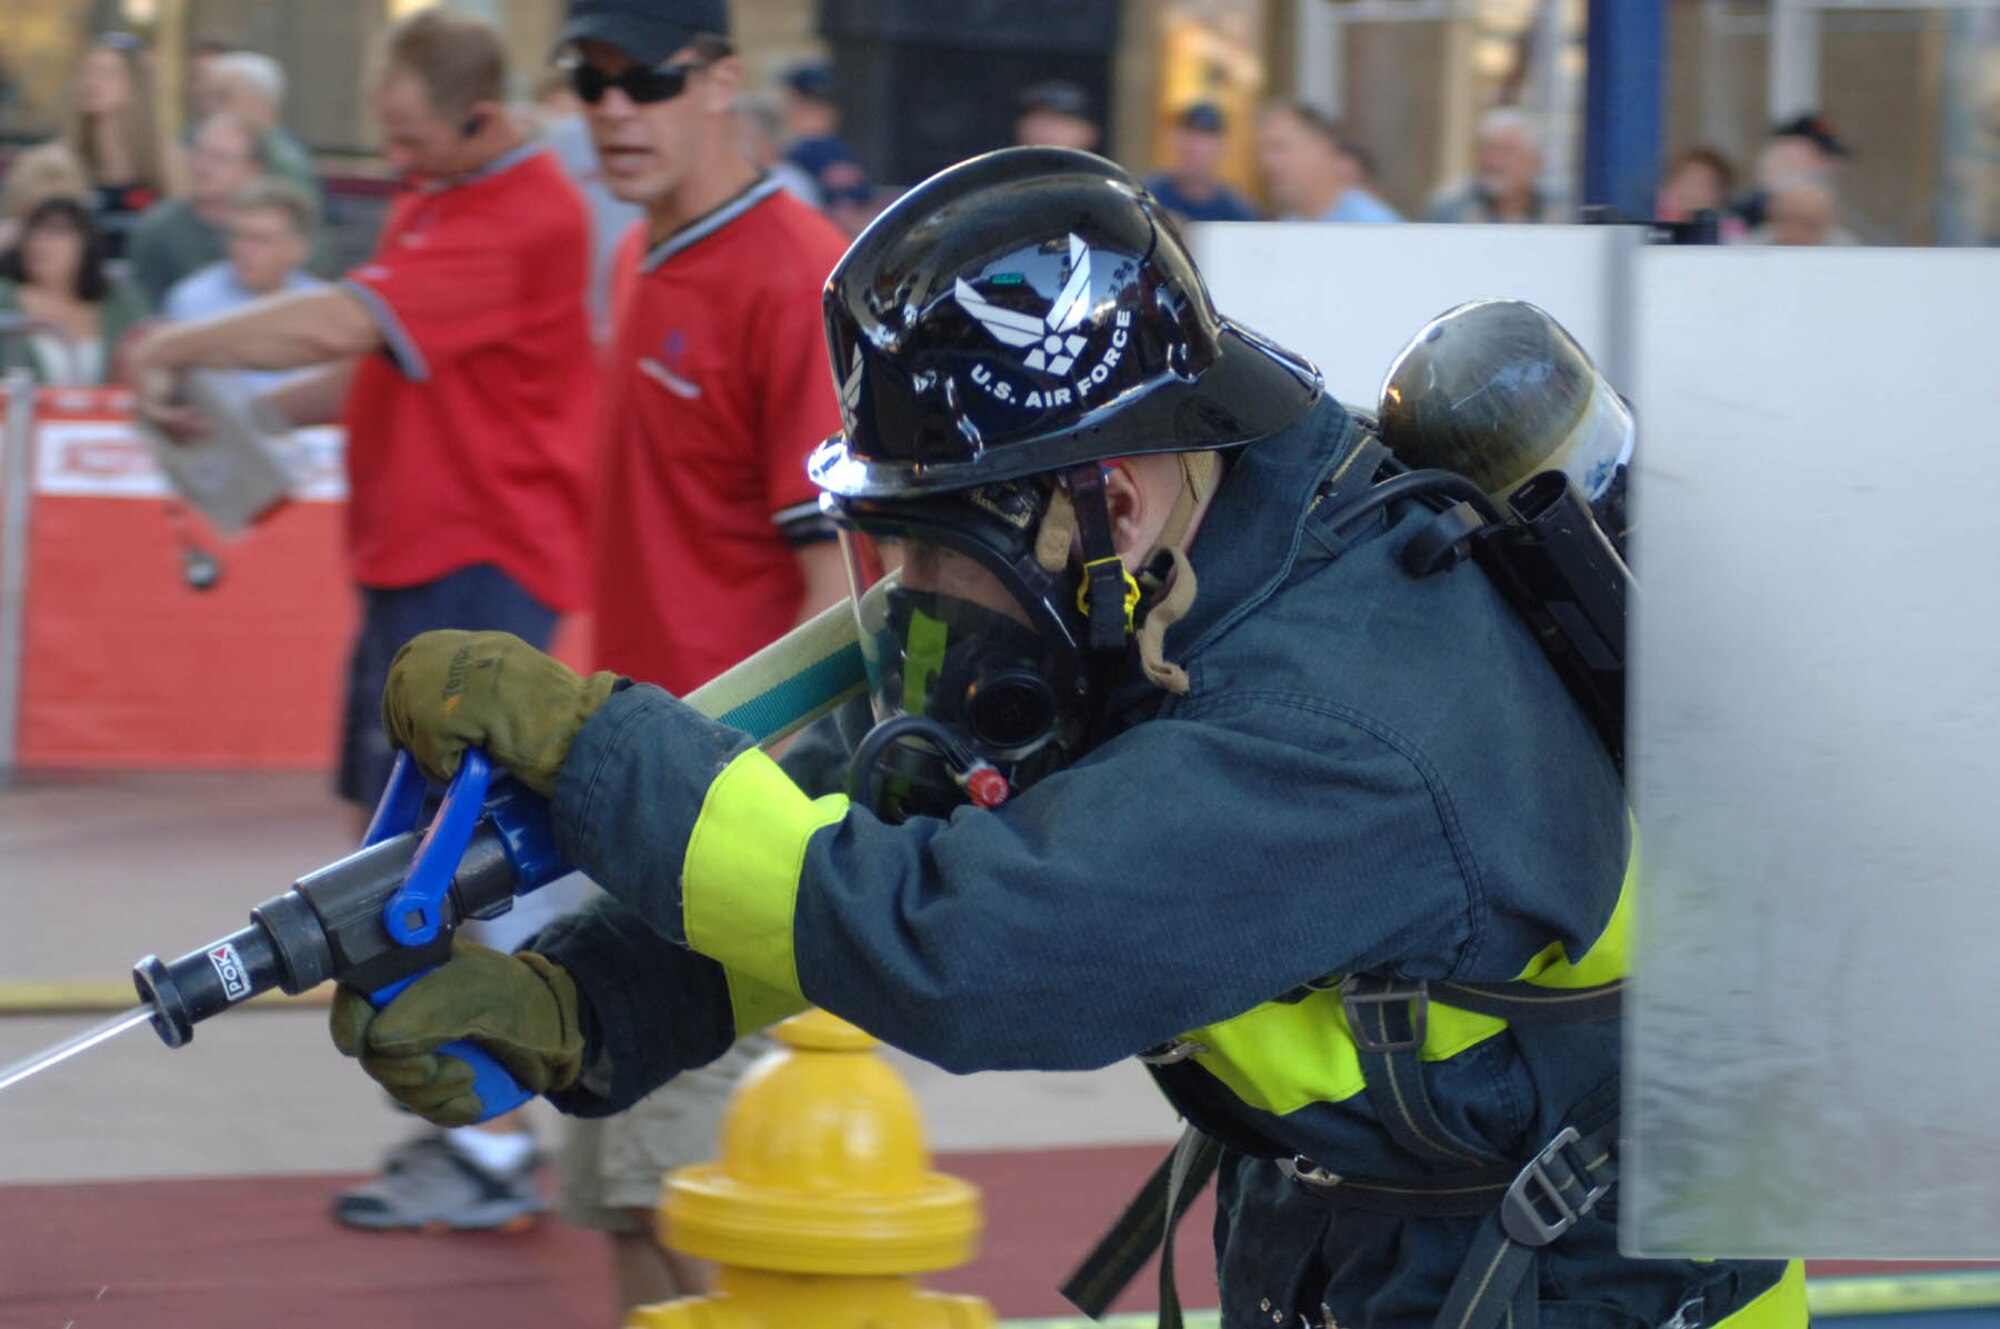 LAS VEGAS (AFPN) – Spangdahlem AB firefighter Gerd Mueller, 52nd Civil Engineer Squadron, demonstrates his accuracy with a firehose, by hitting a volleyball-sized target with a stream of water, during the World Firefighter Combat Challenge XVI Nov. 6 in downtown Las Vegas. (U.S. Air Force photo/John Van Winkle)